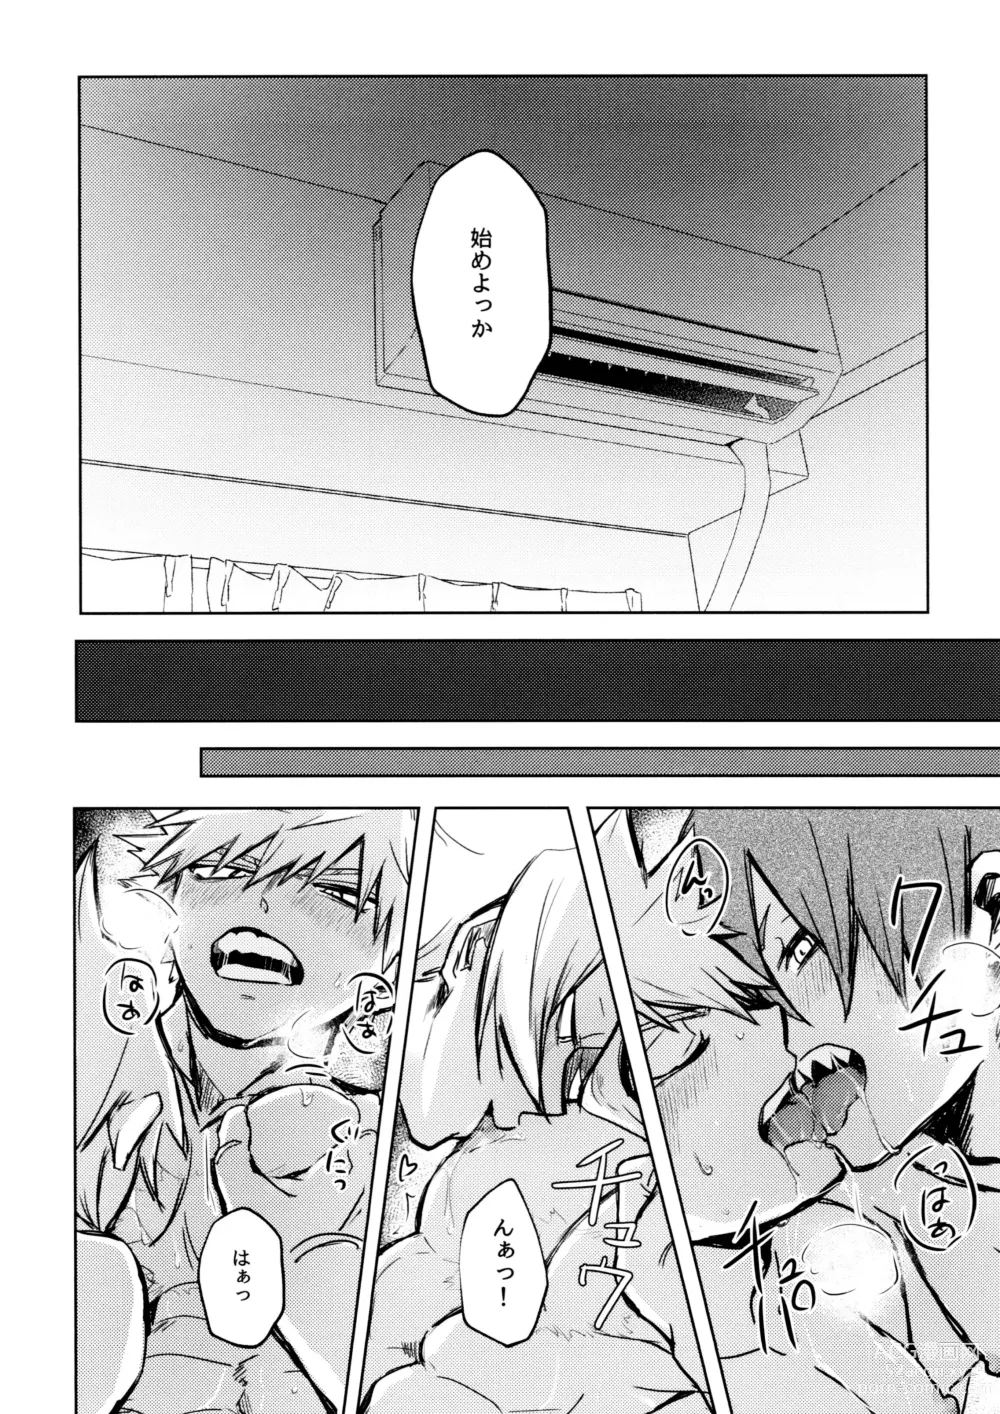 Page 10 of doujinshi INVOLVED WITH